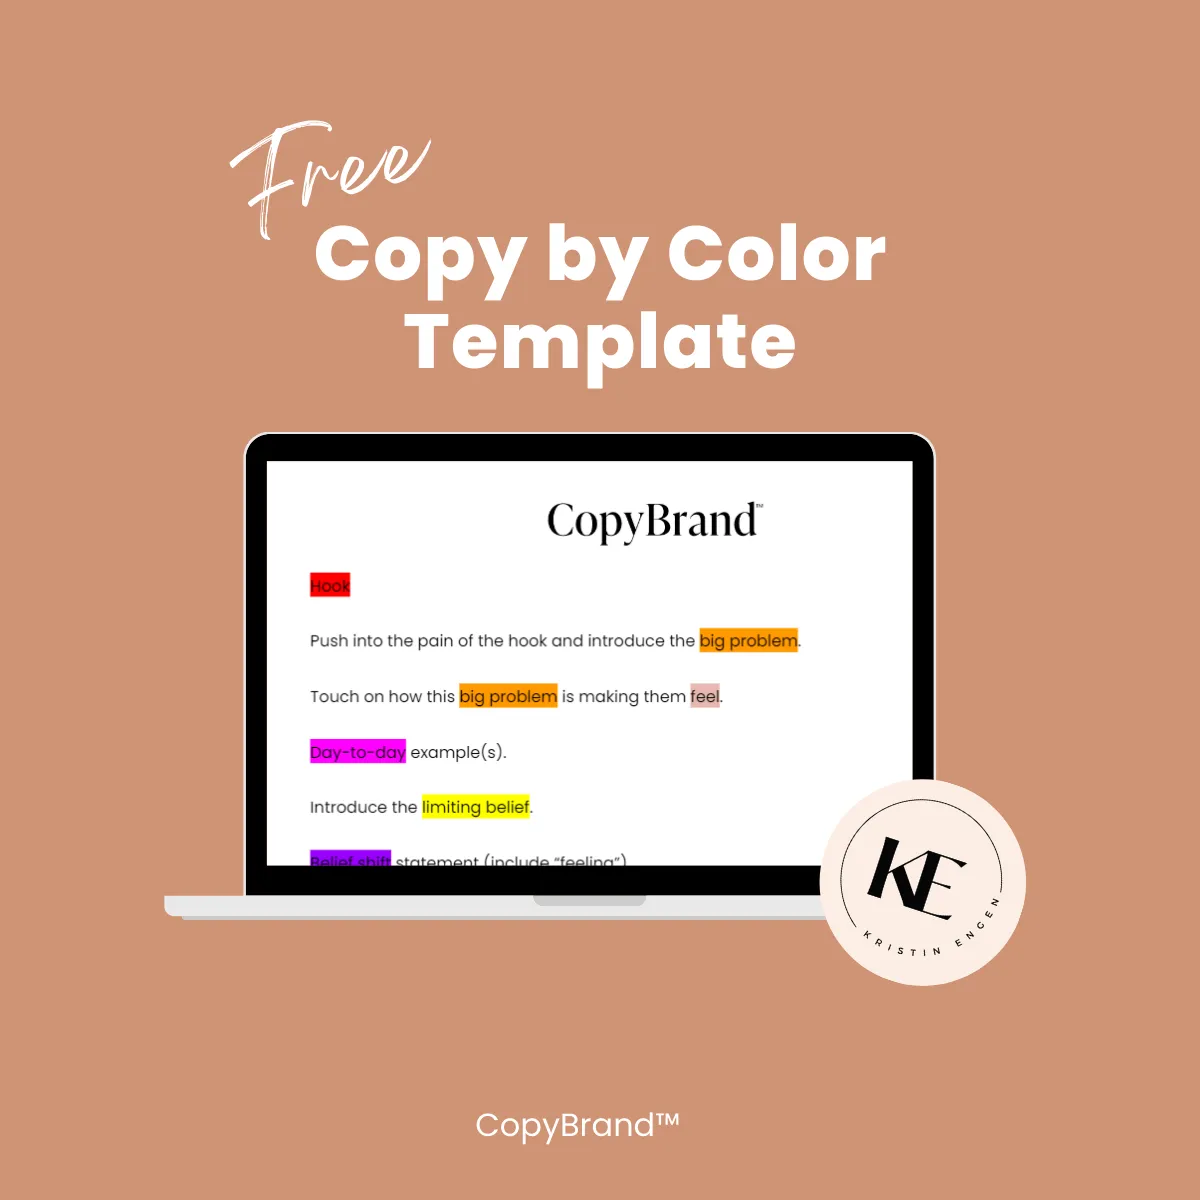 Copy by Color Template